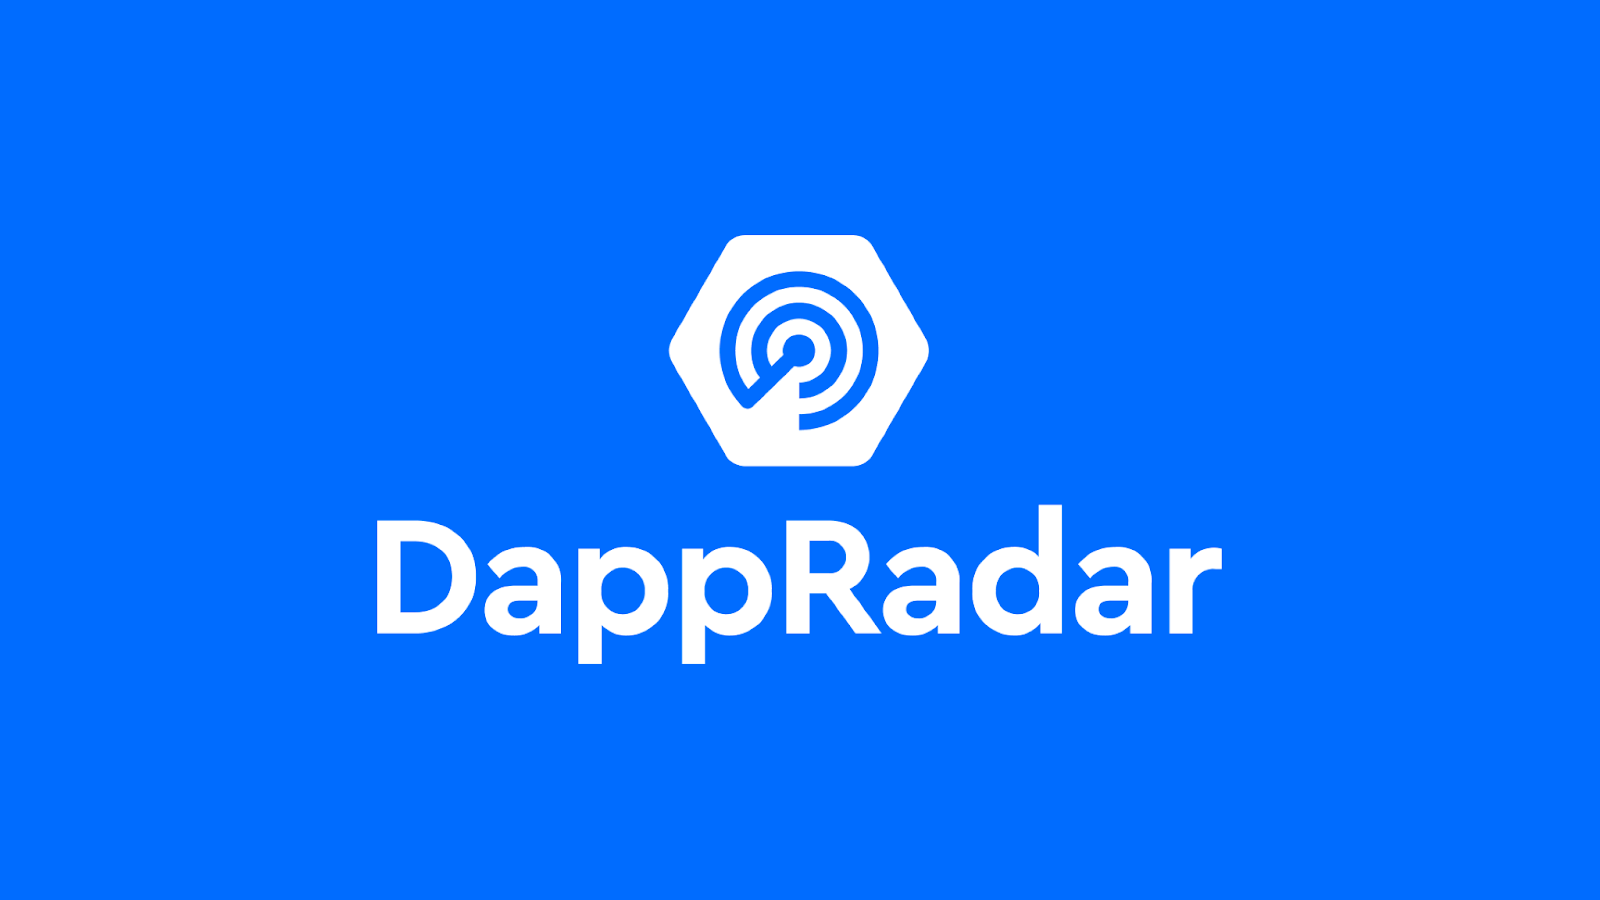 DappRadar leverages QuickNode to protect users from blockchain scams.